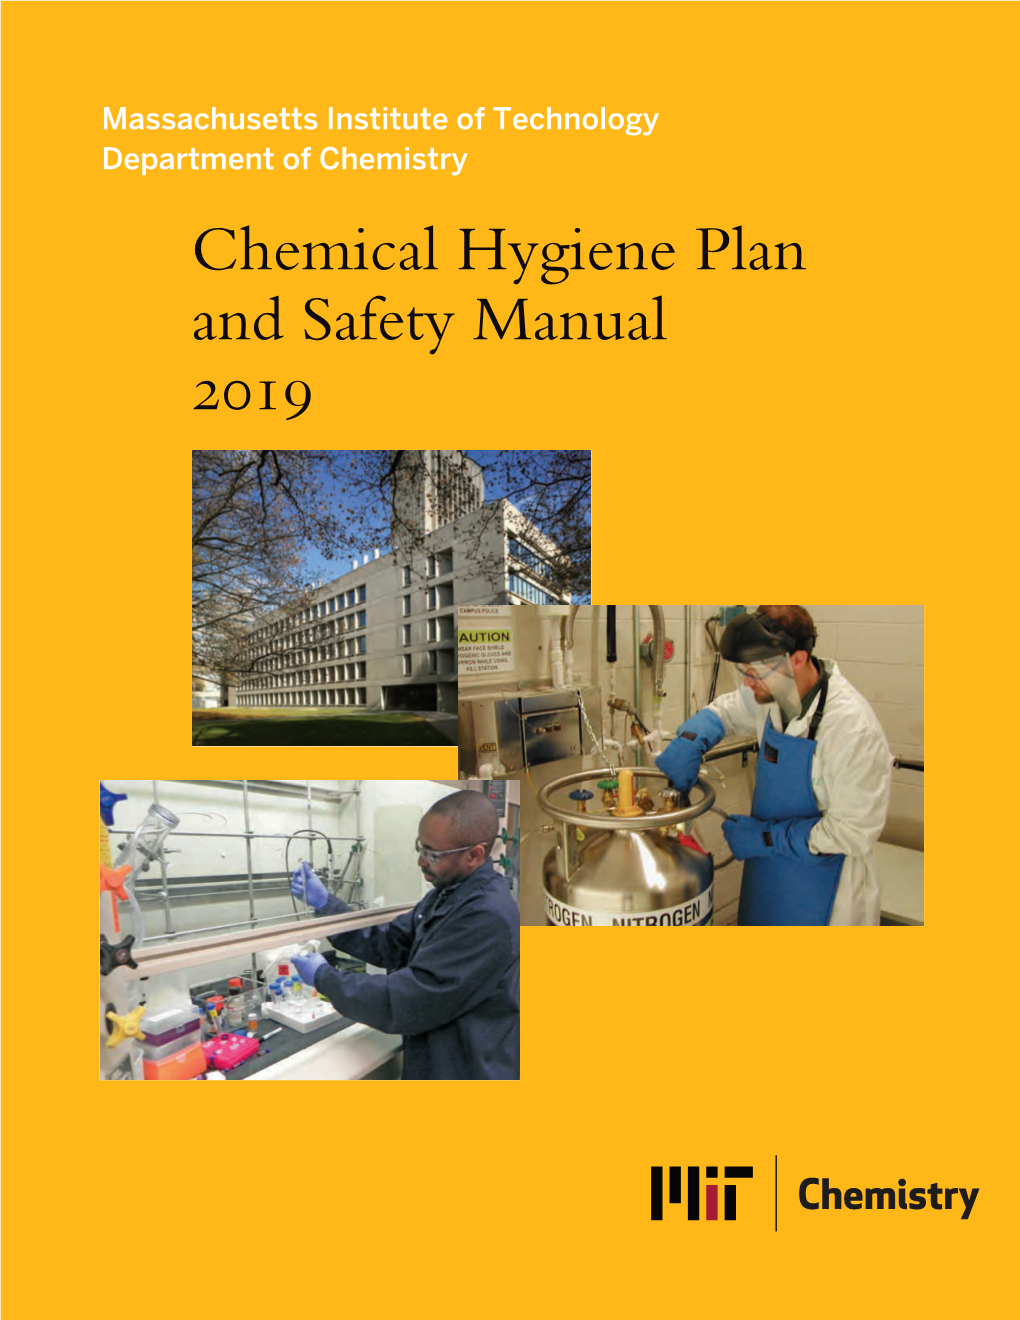 Chemical Hygiene Plan and Safety Manual 2019 Chemical Hygiene Plan and Safety Manual 2019 Massachusetts Institute of Technology Department of Chemistry